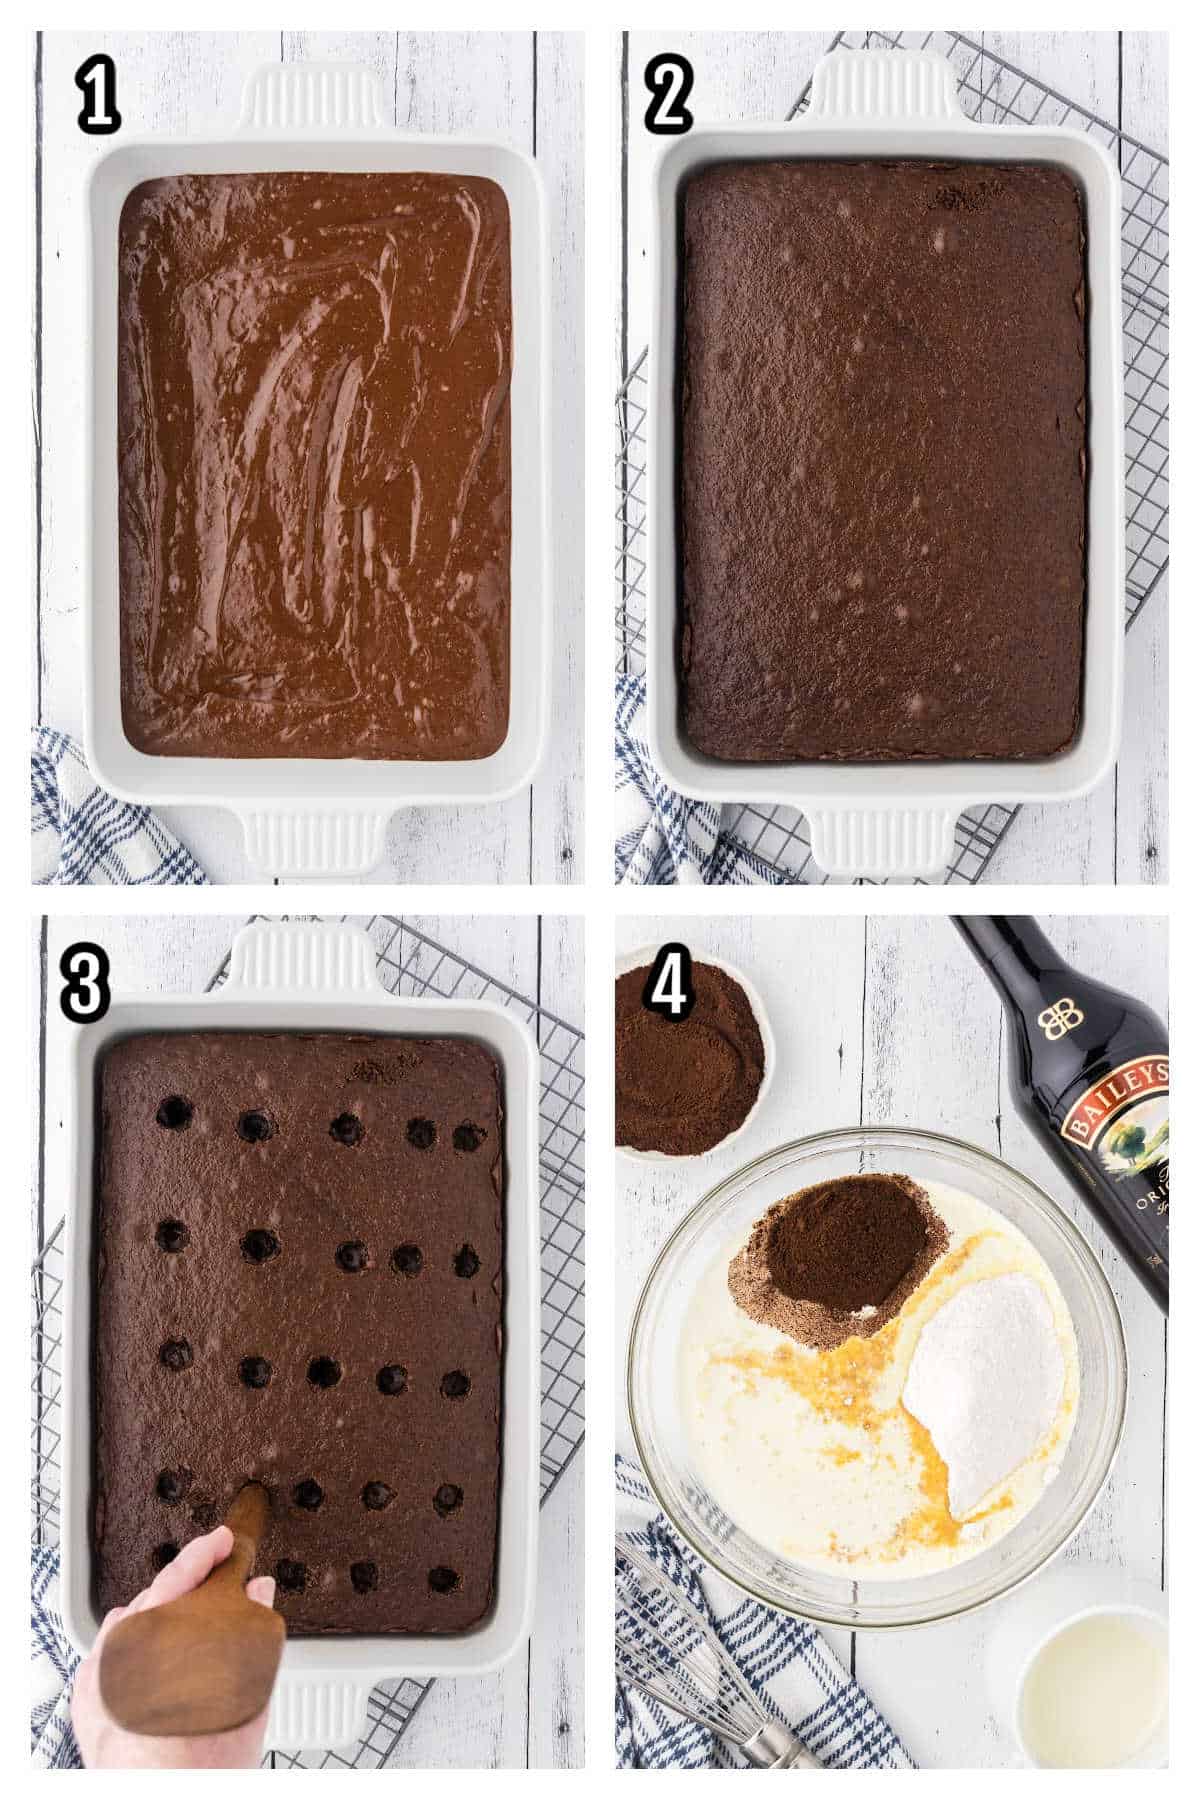 Collage of the first four steps to making the chocolate cake for Baileys Irish Cream poke cake.  